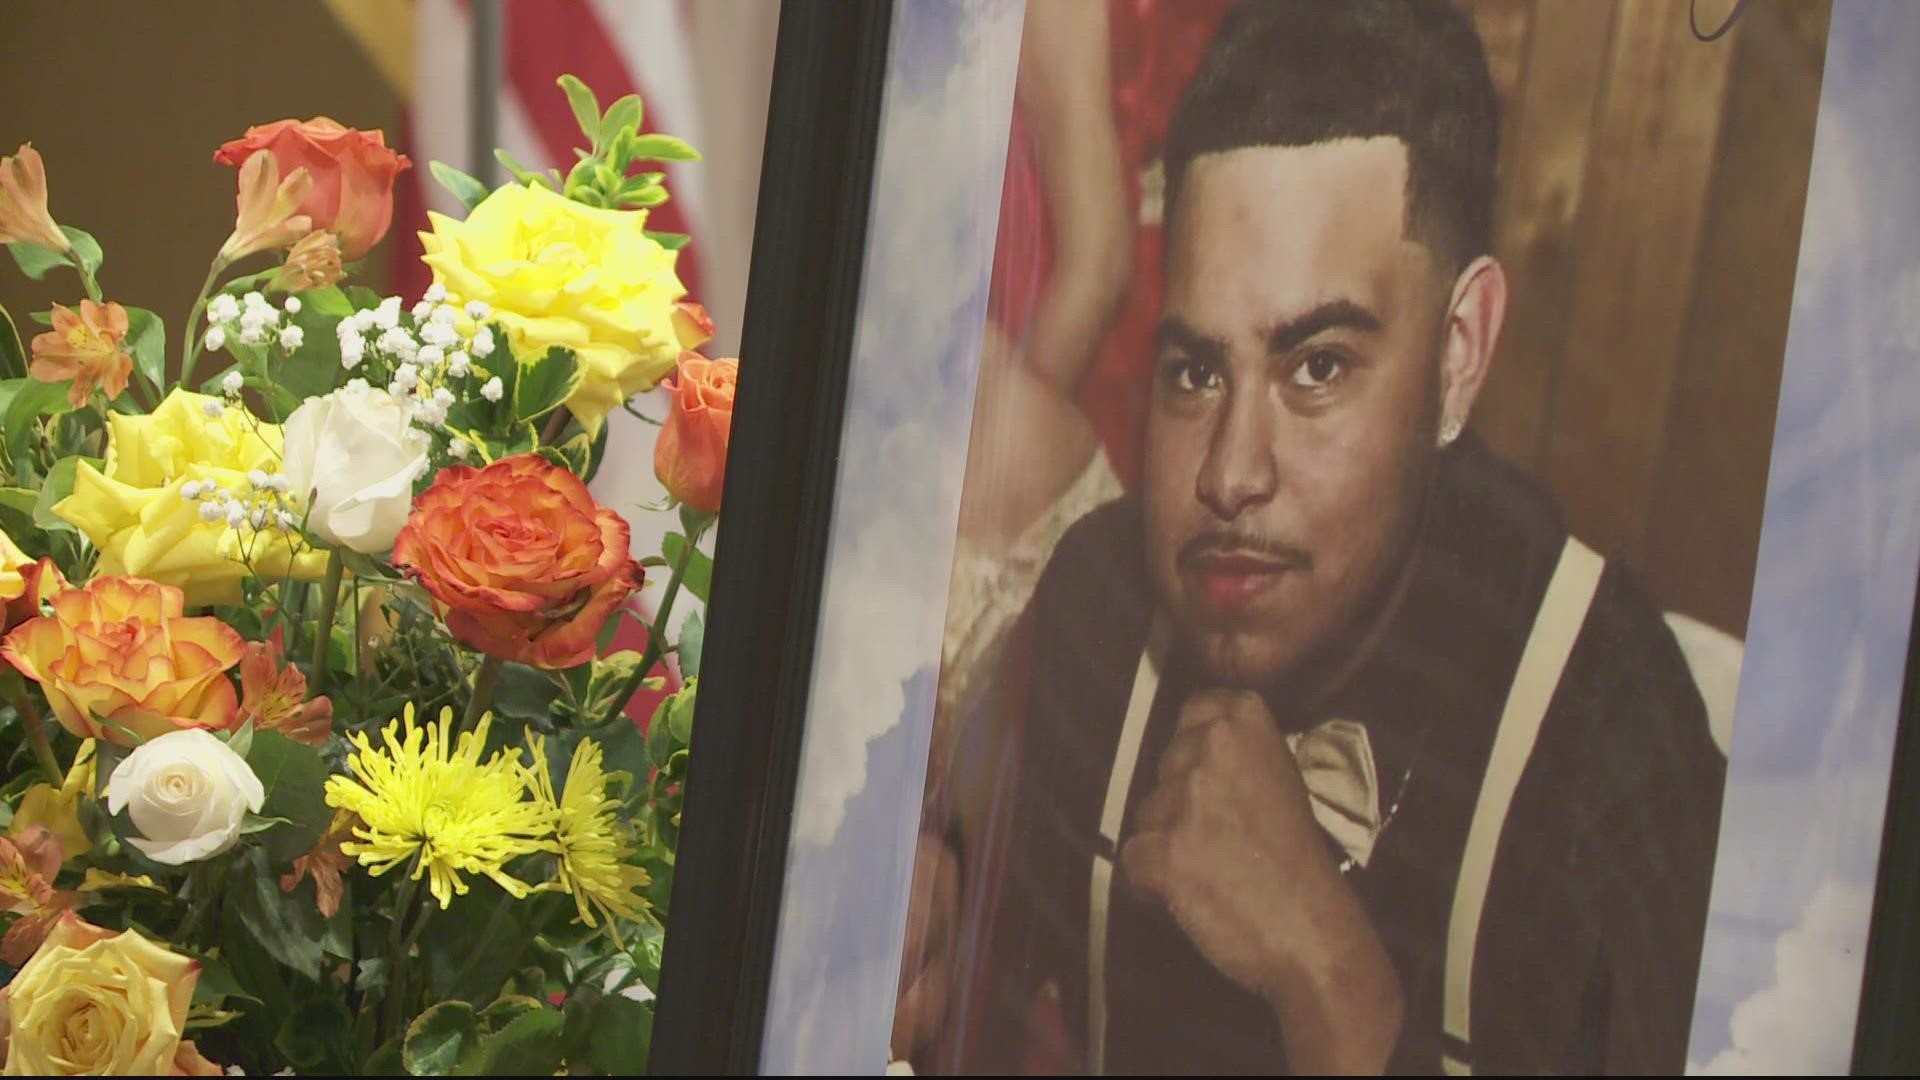 An act of gun violence, that's what killed Anthony Cruz-Santos, according to his family. On Saturday, a memorial service and call to action was held in his memory.